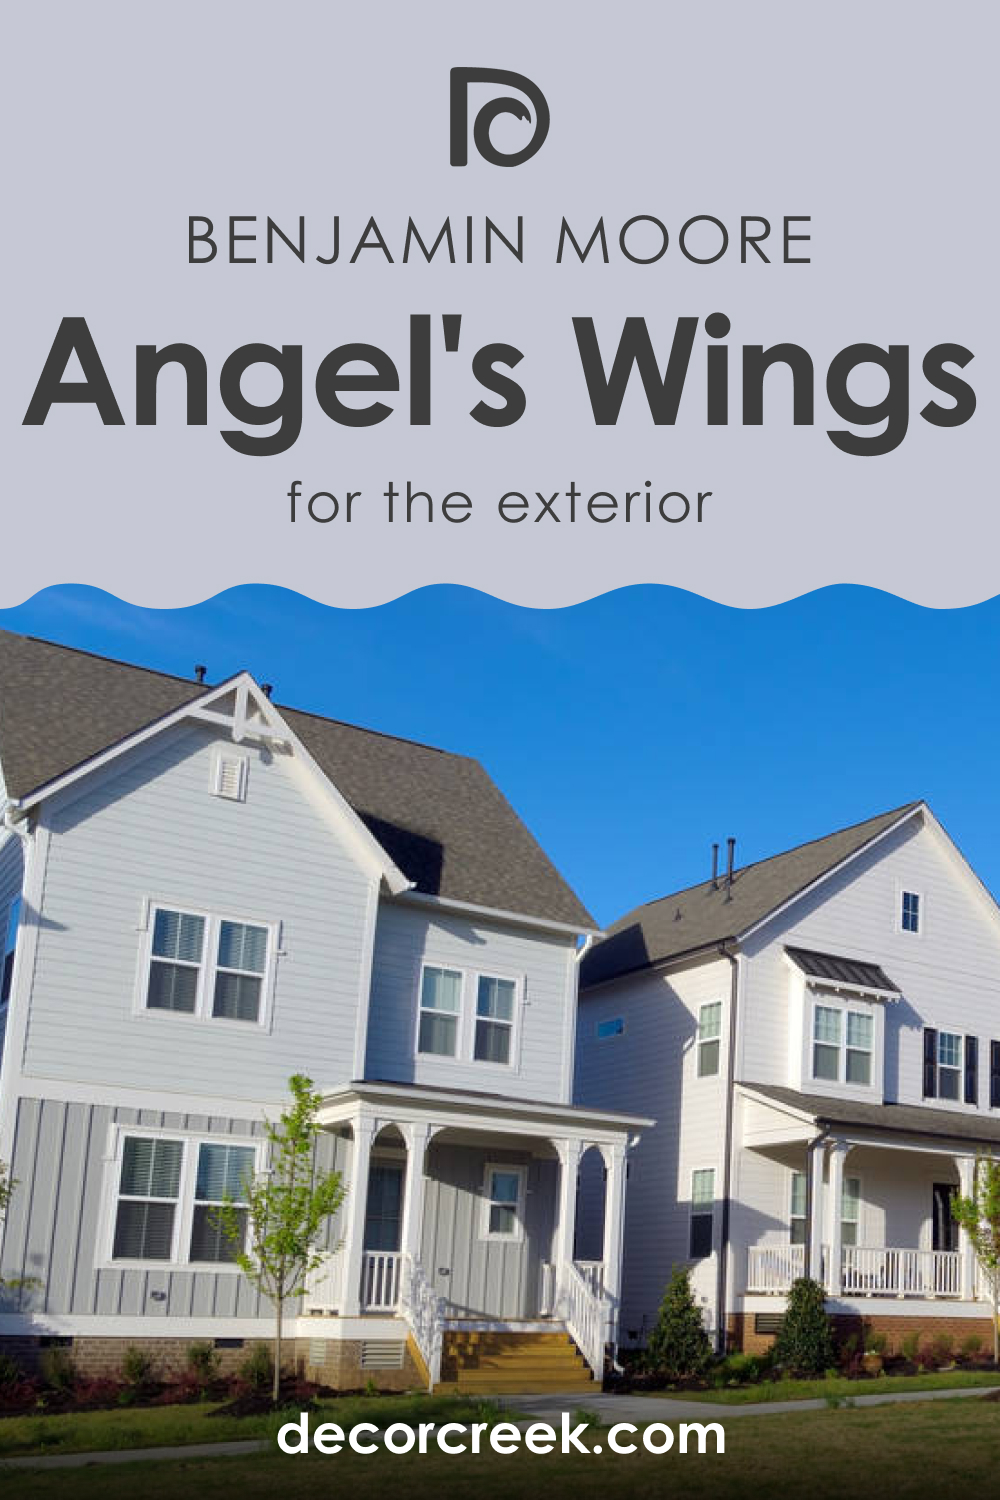 How to Use Angel's Wings 1423 for an Exterior?